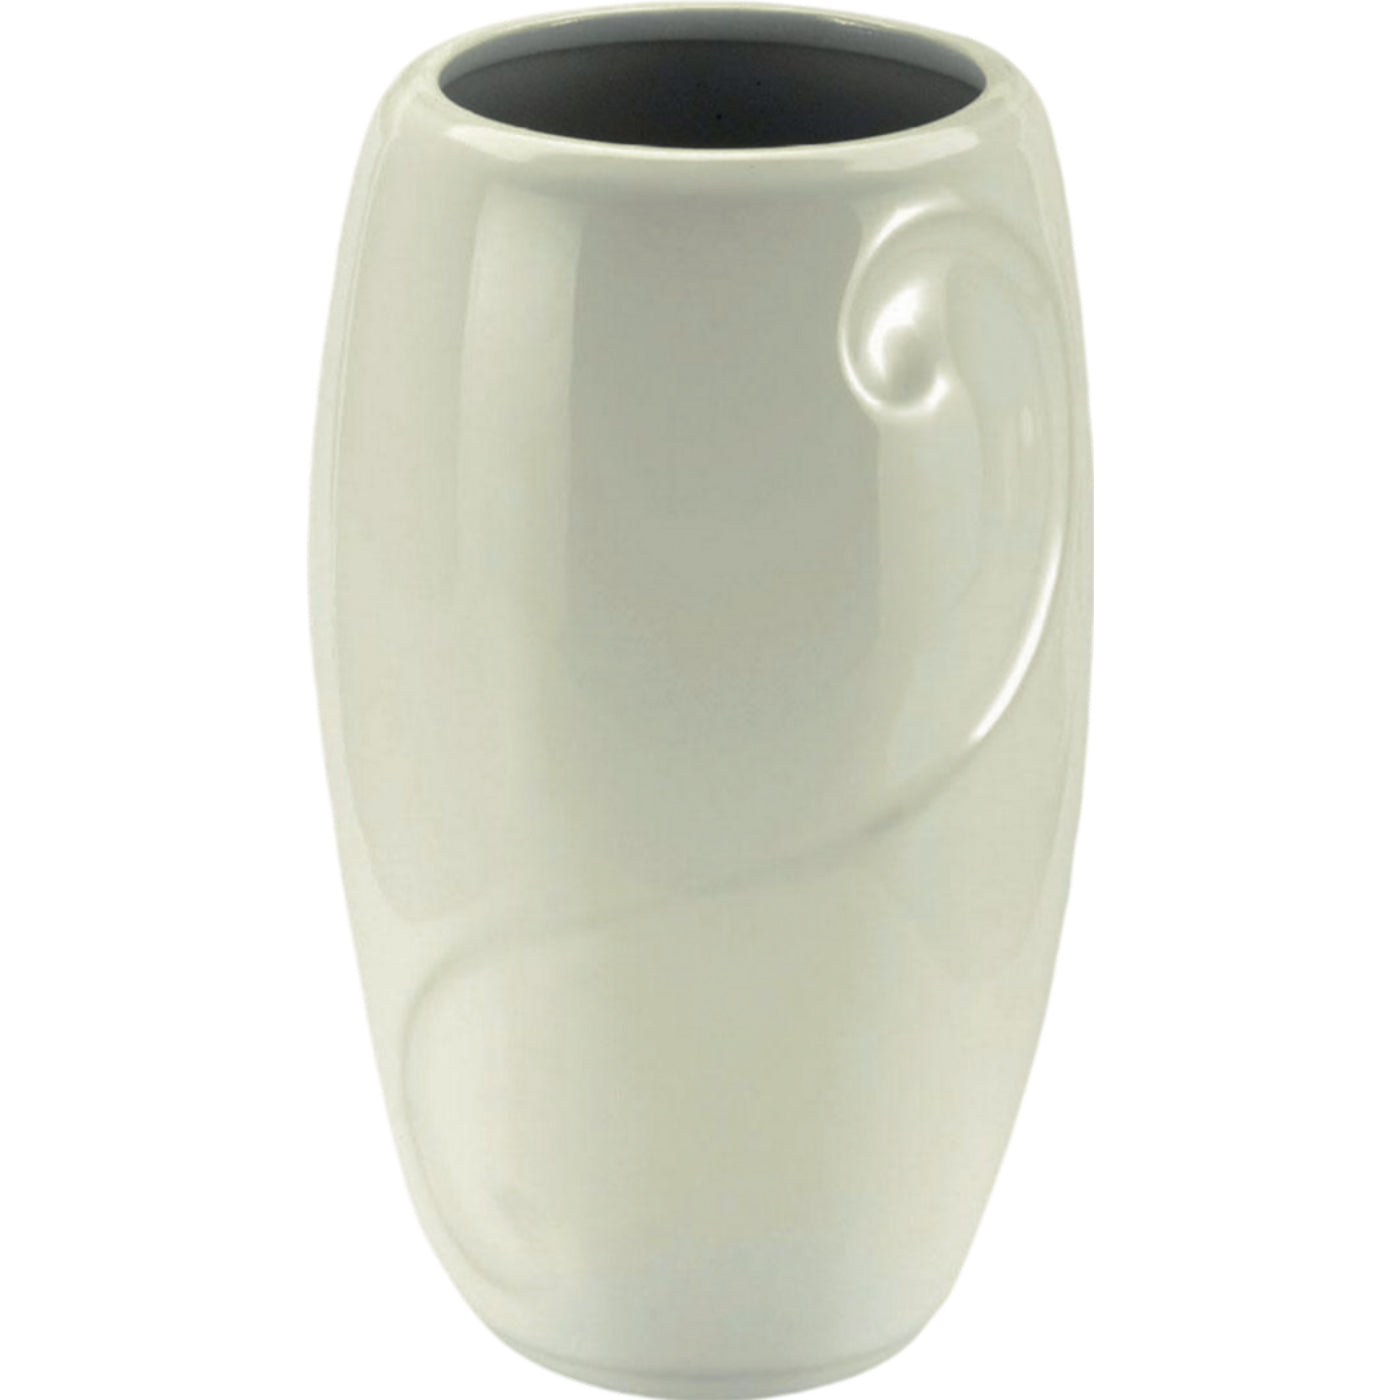 Grave vase Sharon ivory 21x13cm - 8.3x5.1in In ivory porcelain, ground attached SH124T/A